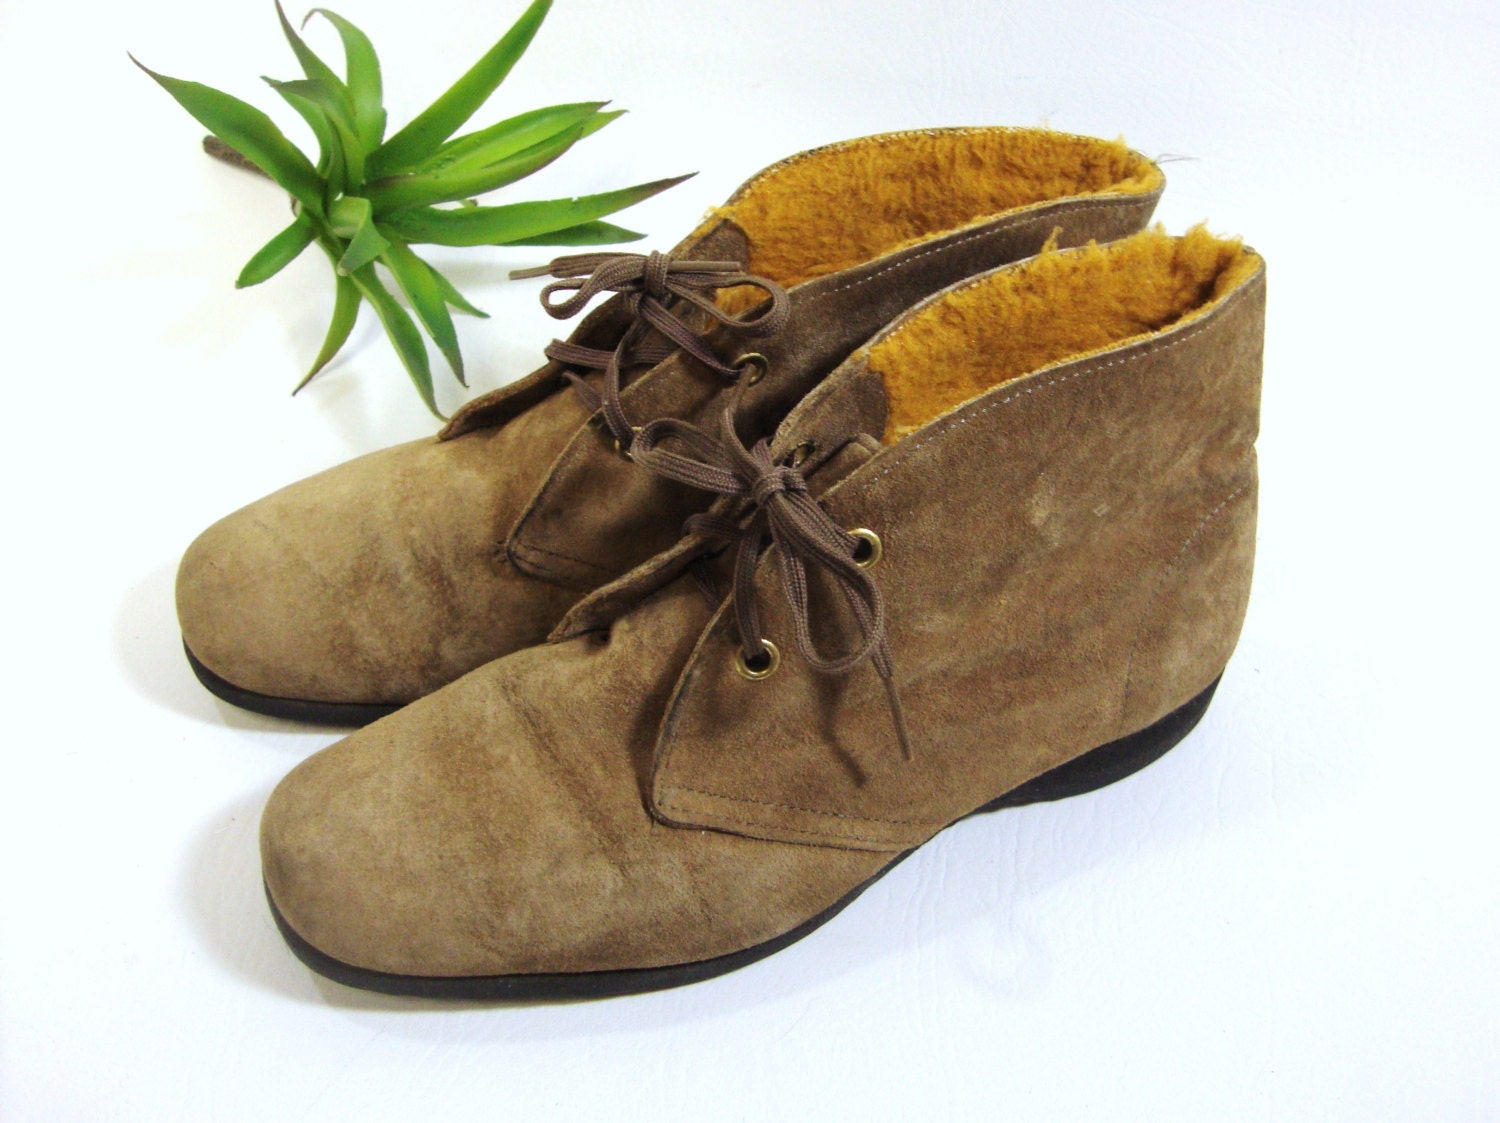 Vintage Suede Ankle Boots 1970's Hush Puppies